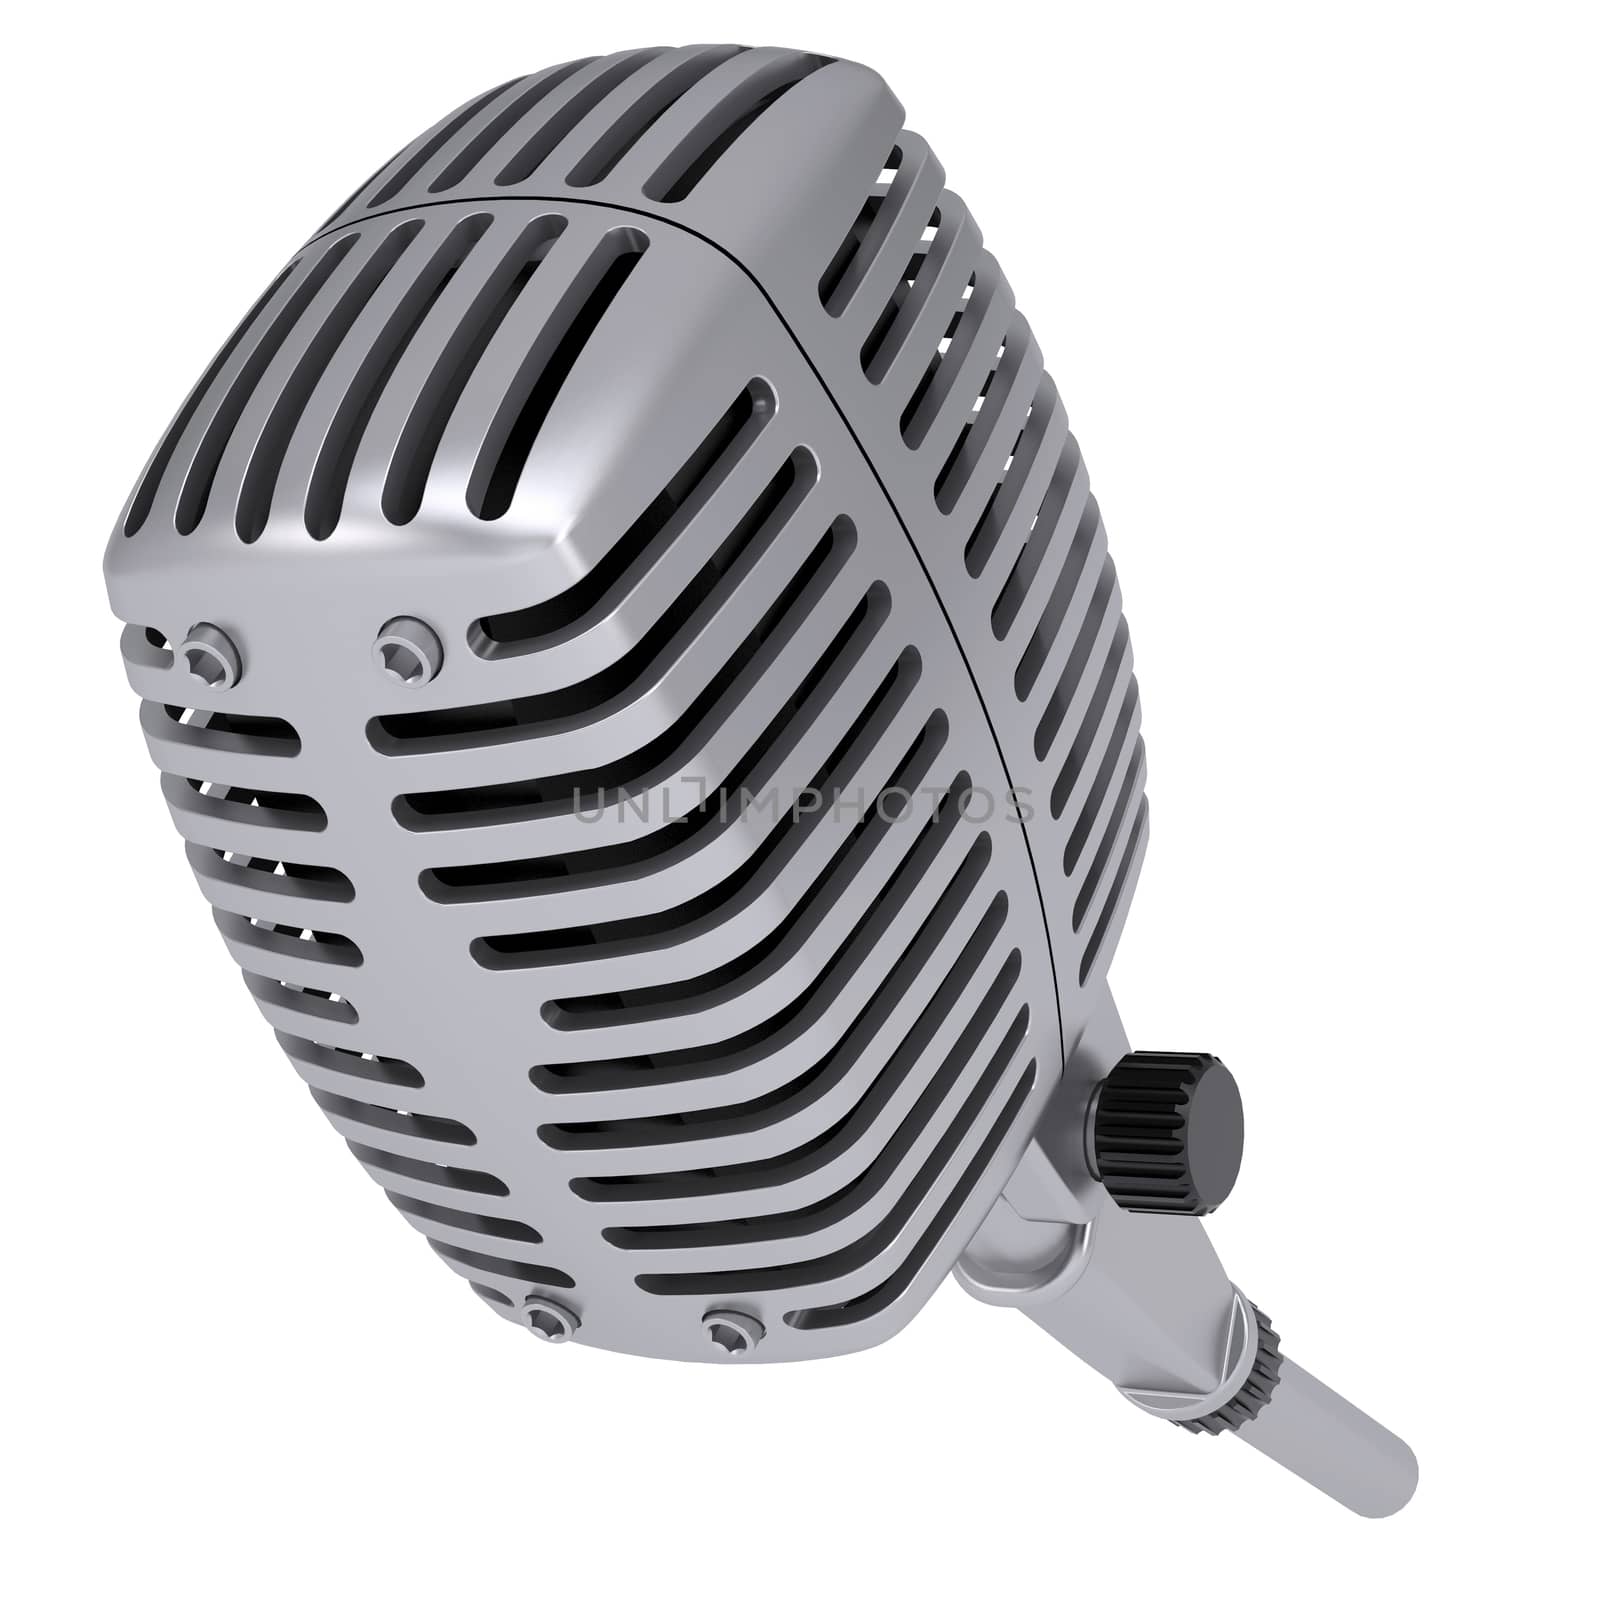 Studio microphone. Isolated render on a white background